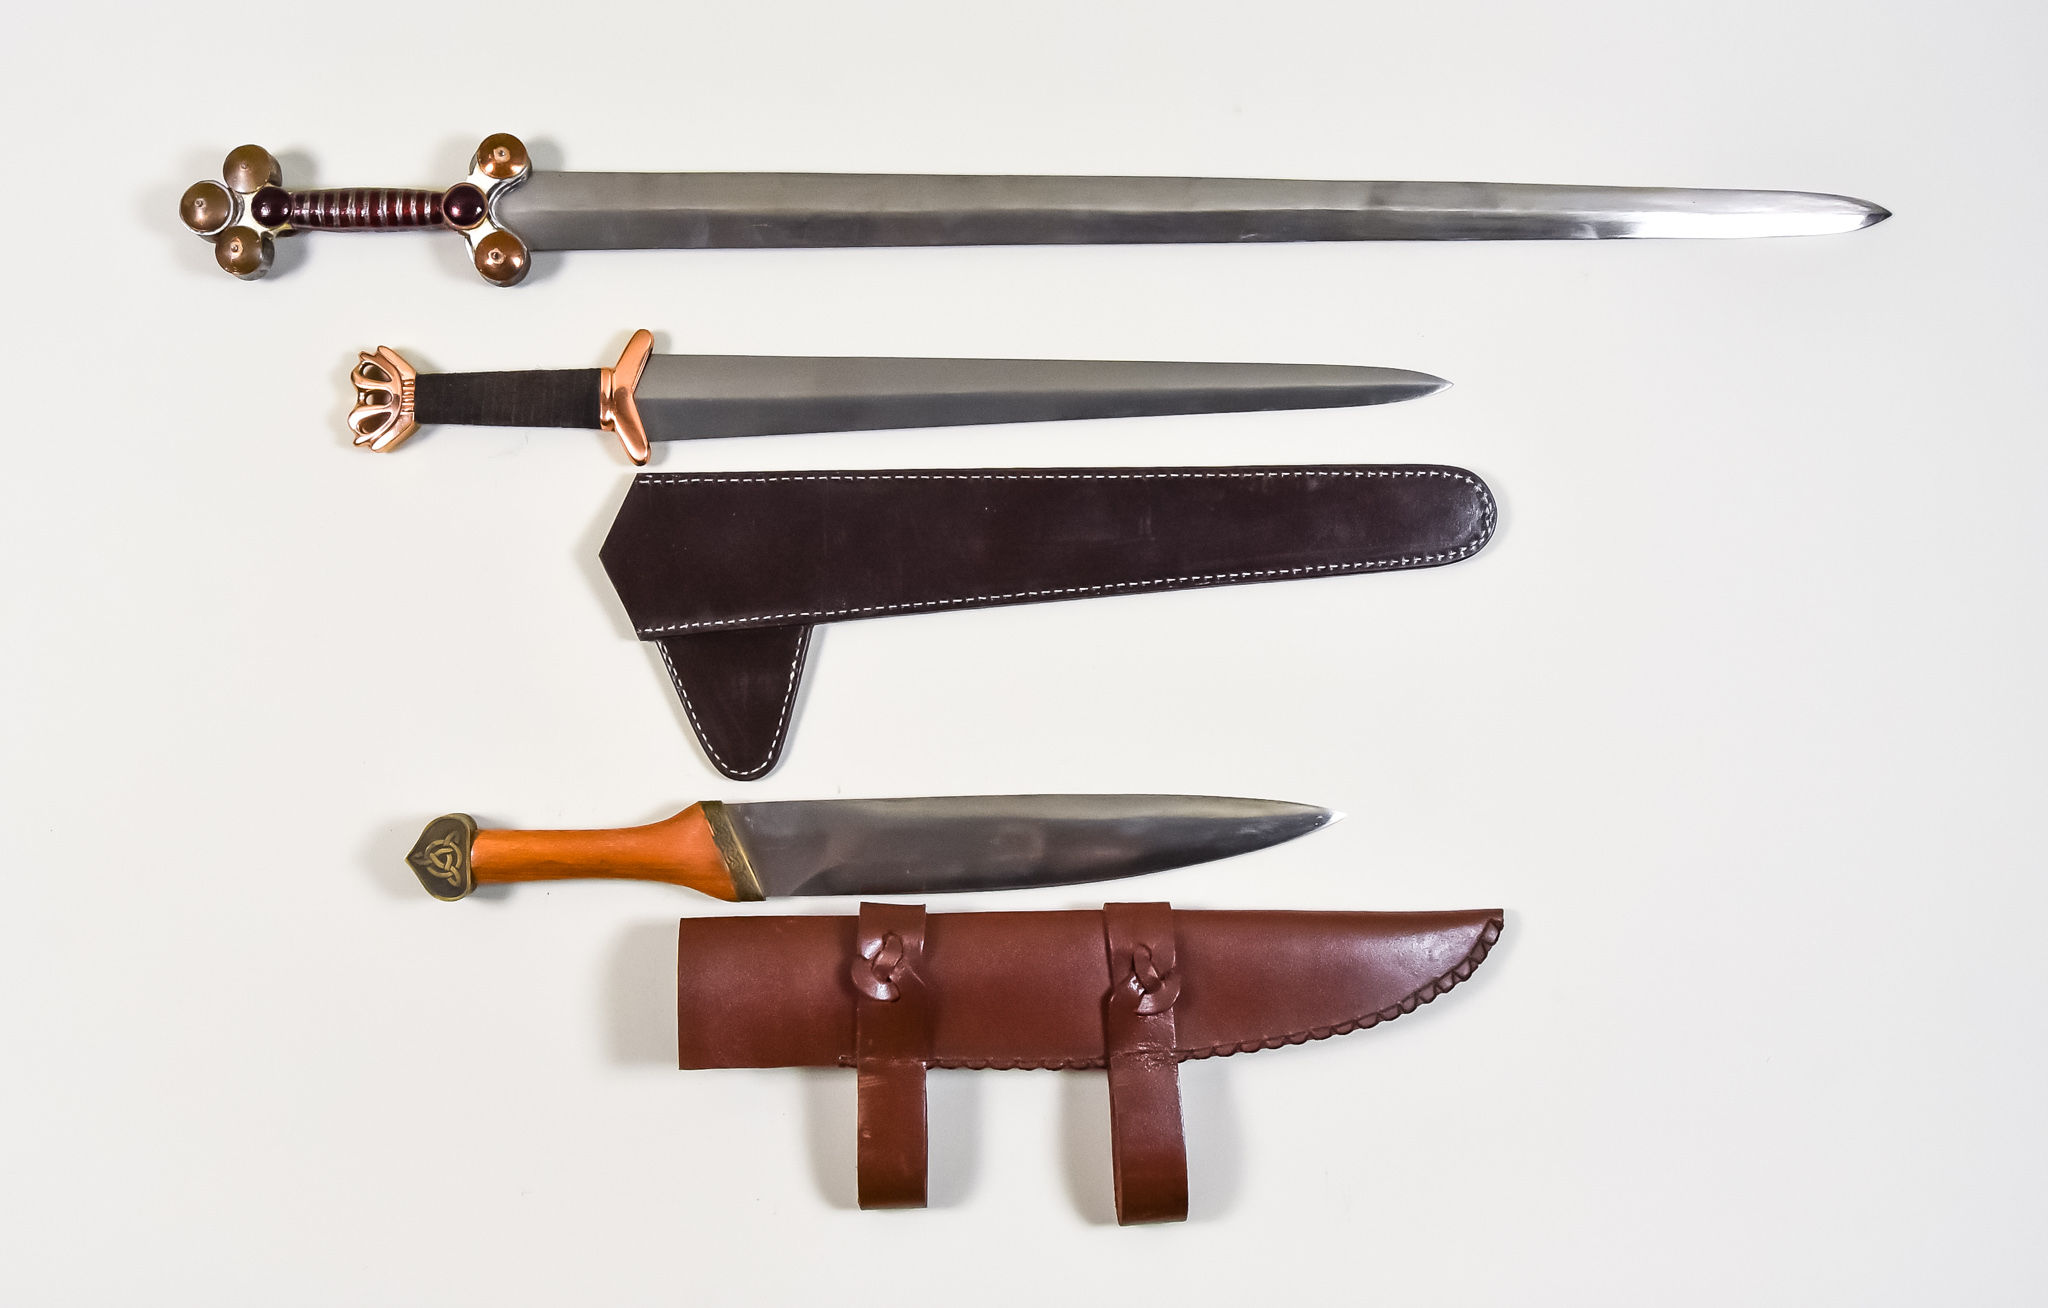 Five Reproduction Celtic Edged Weapons, Modern, including - three swords and two daggers, sizes